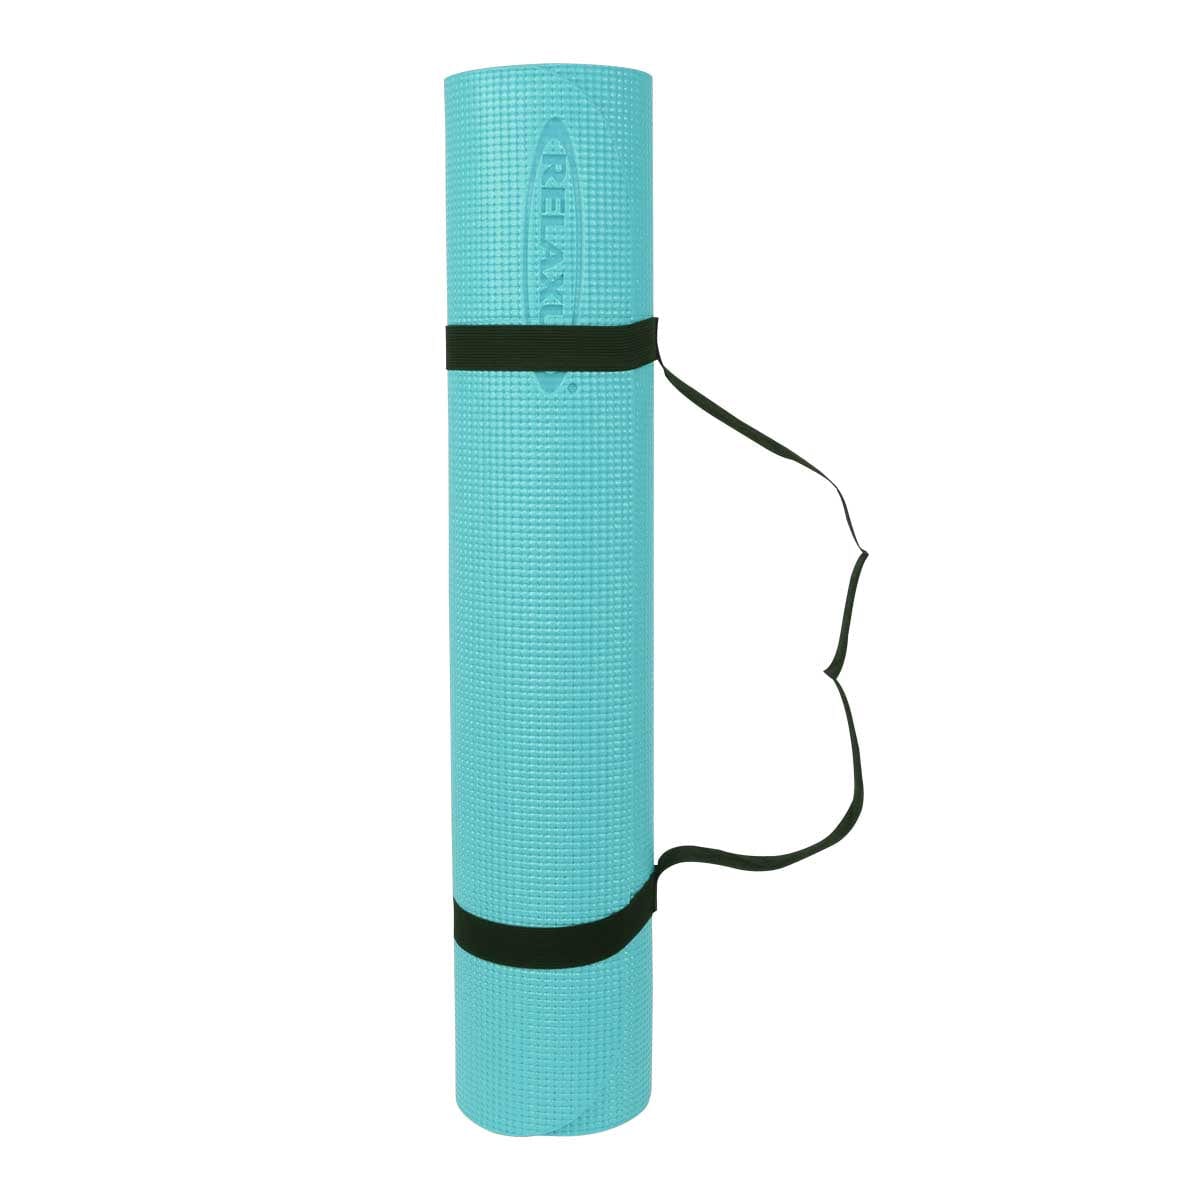 Yoga Mats - Rest and Relax